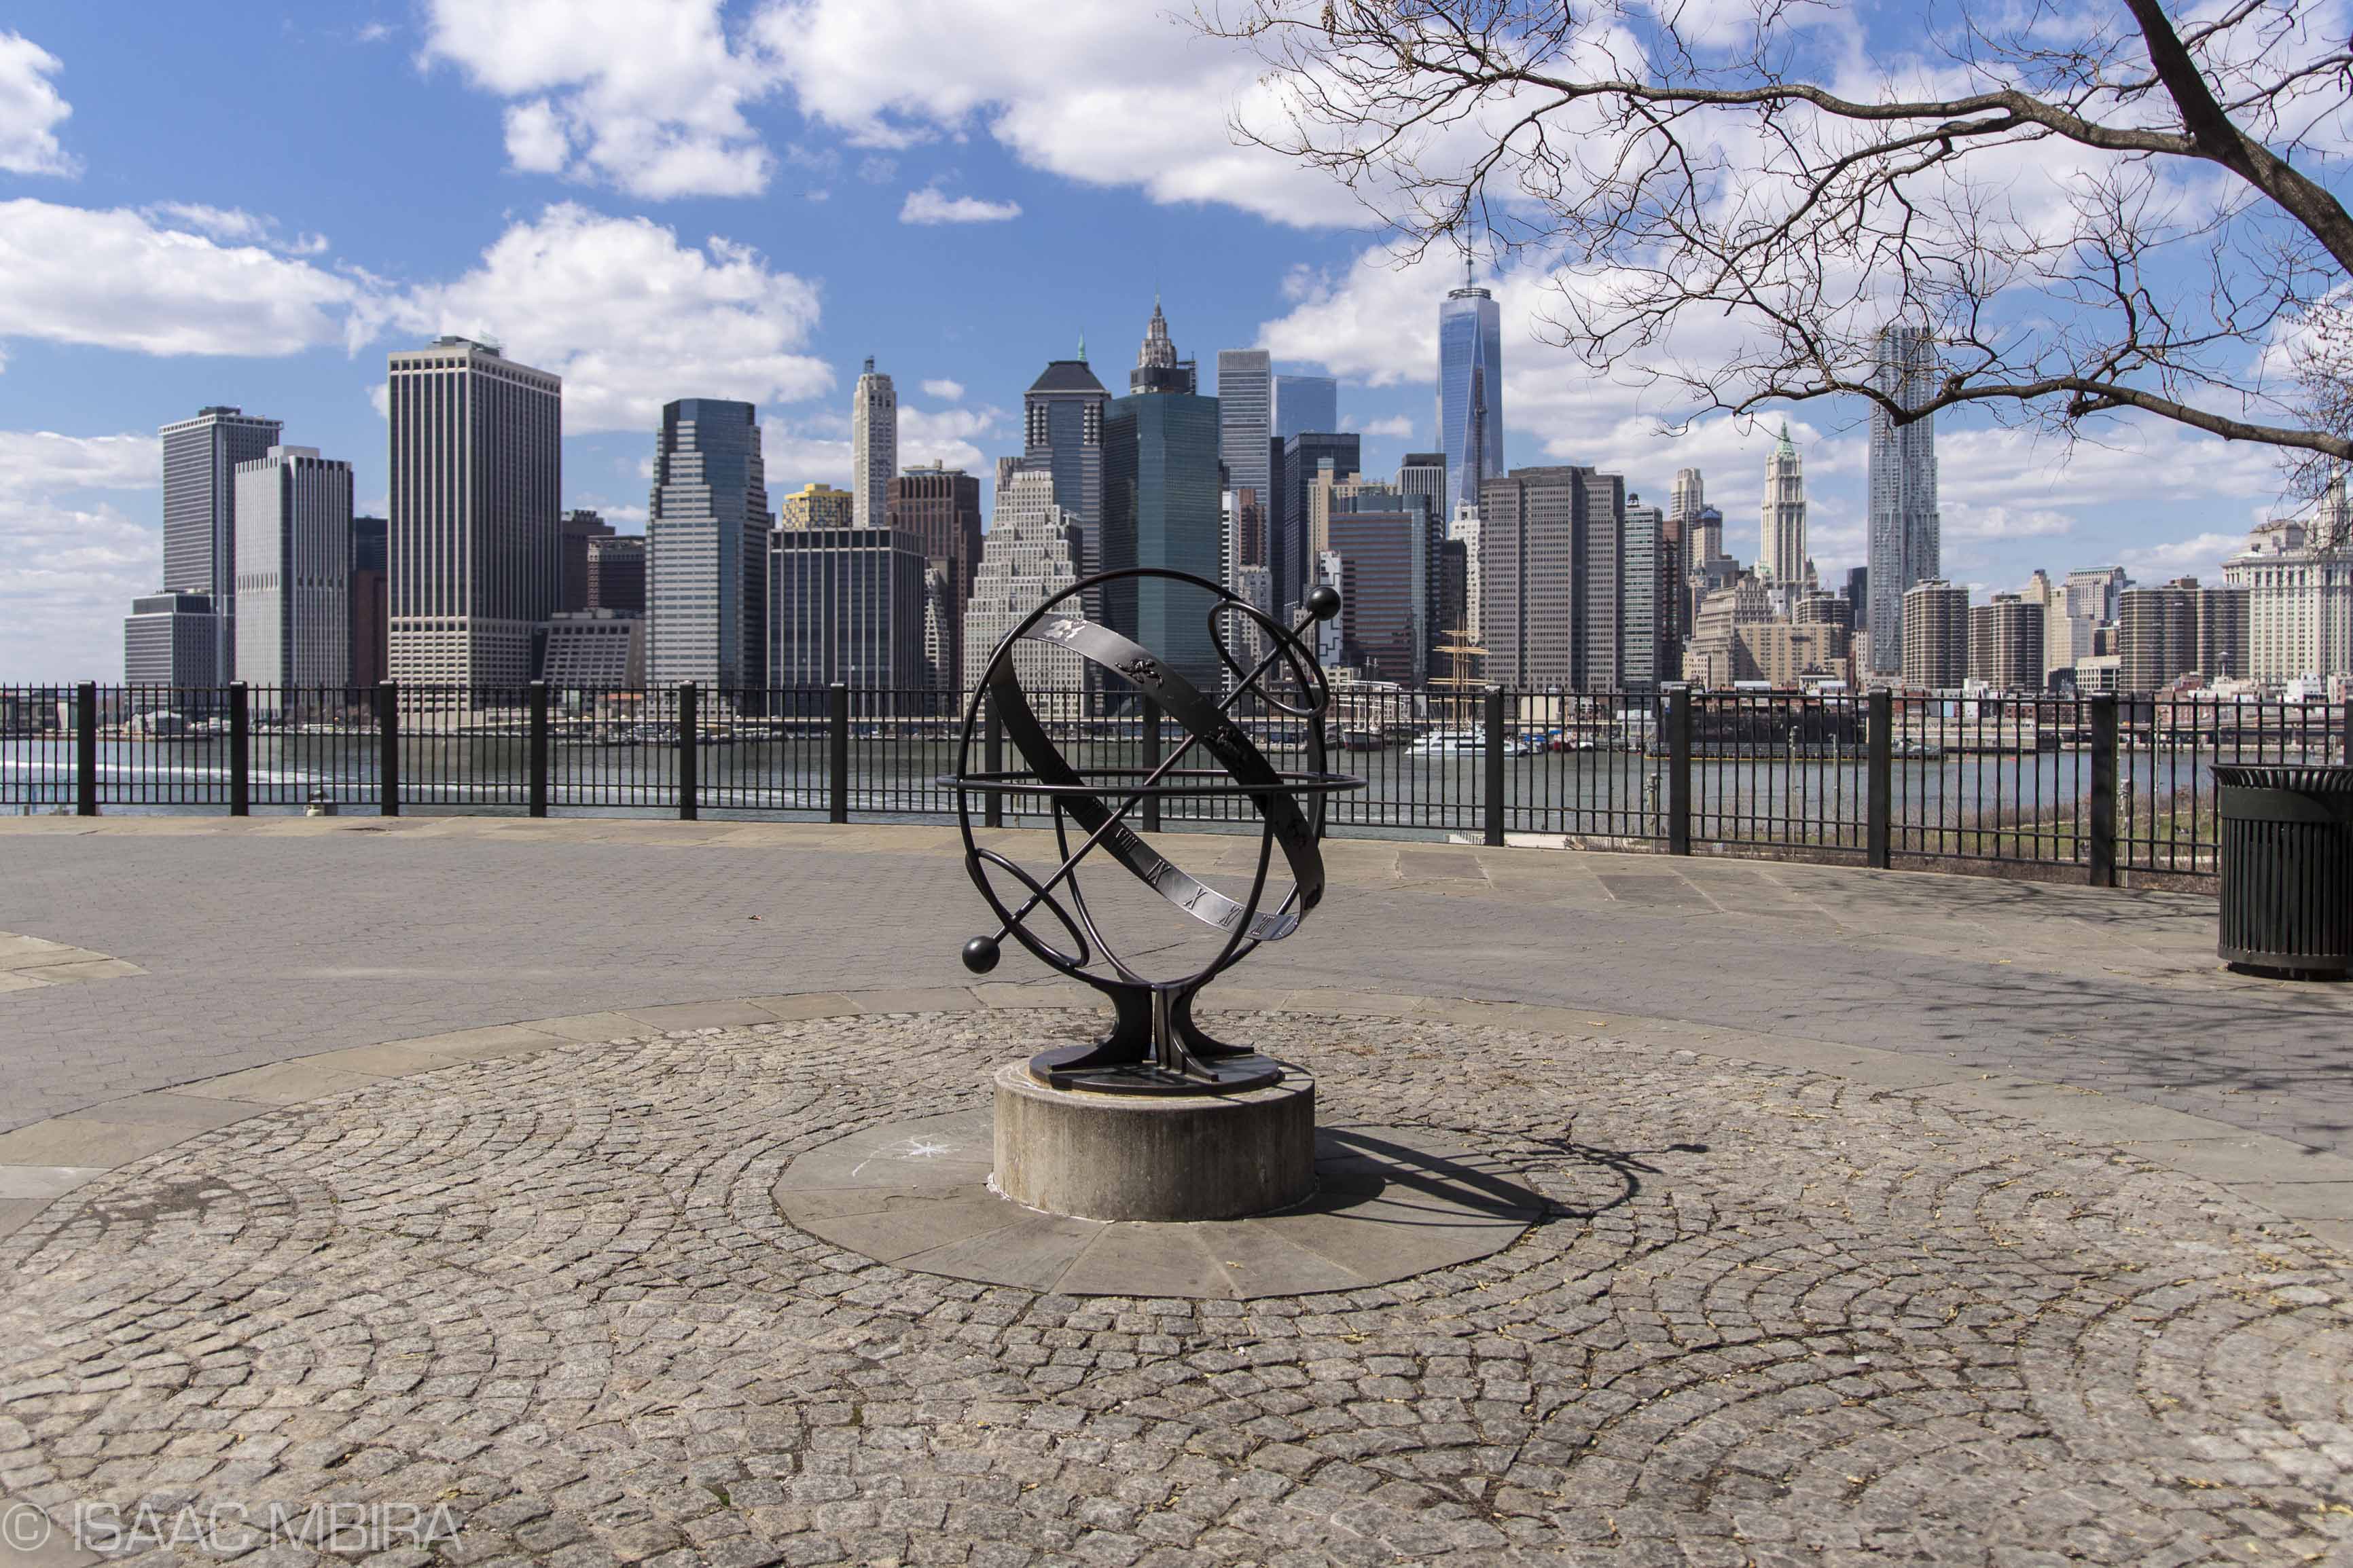 Image of Downtown Manhattan as seen from the Brooklyn Heights Promenade, with sundial in foreground